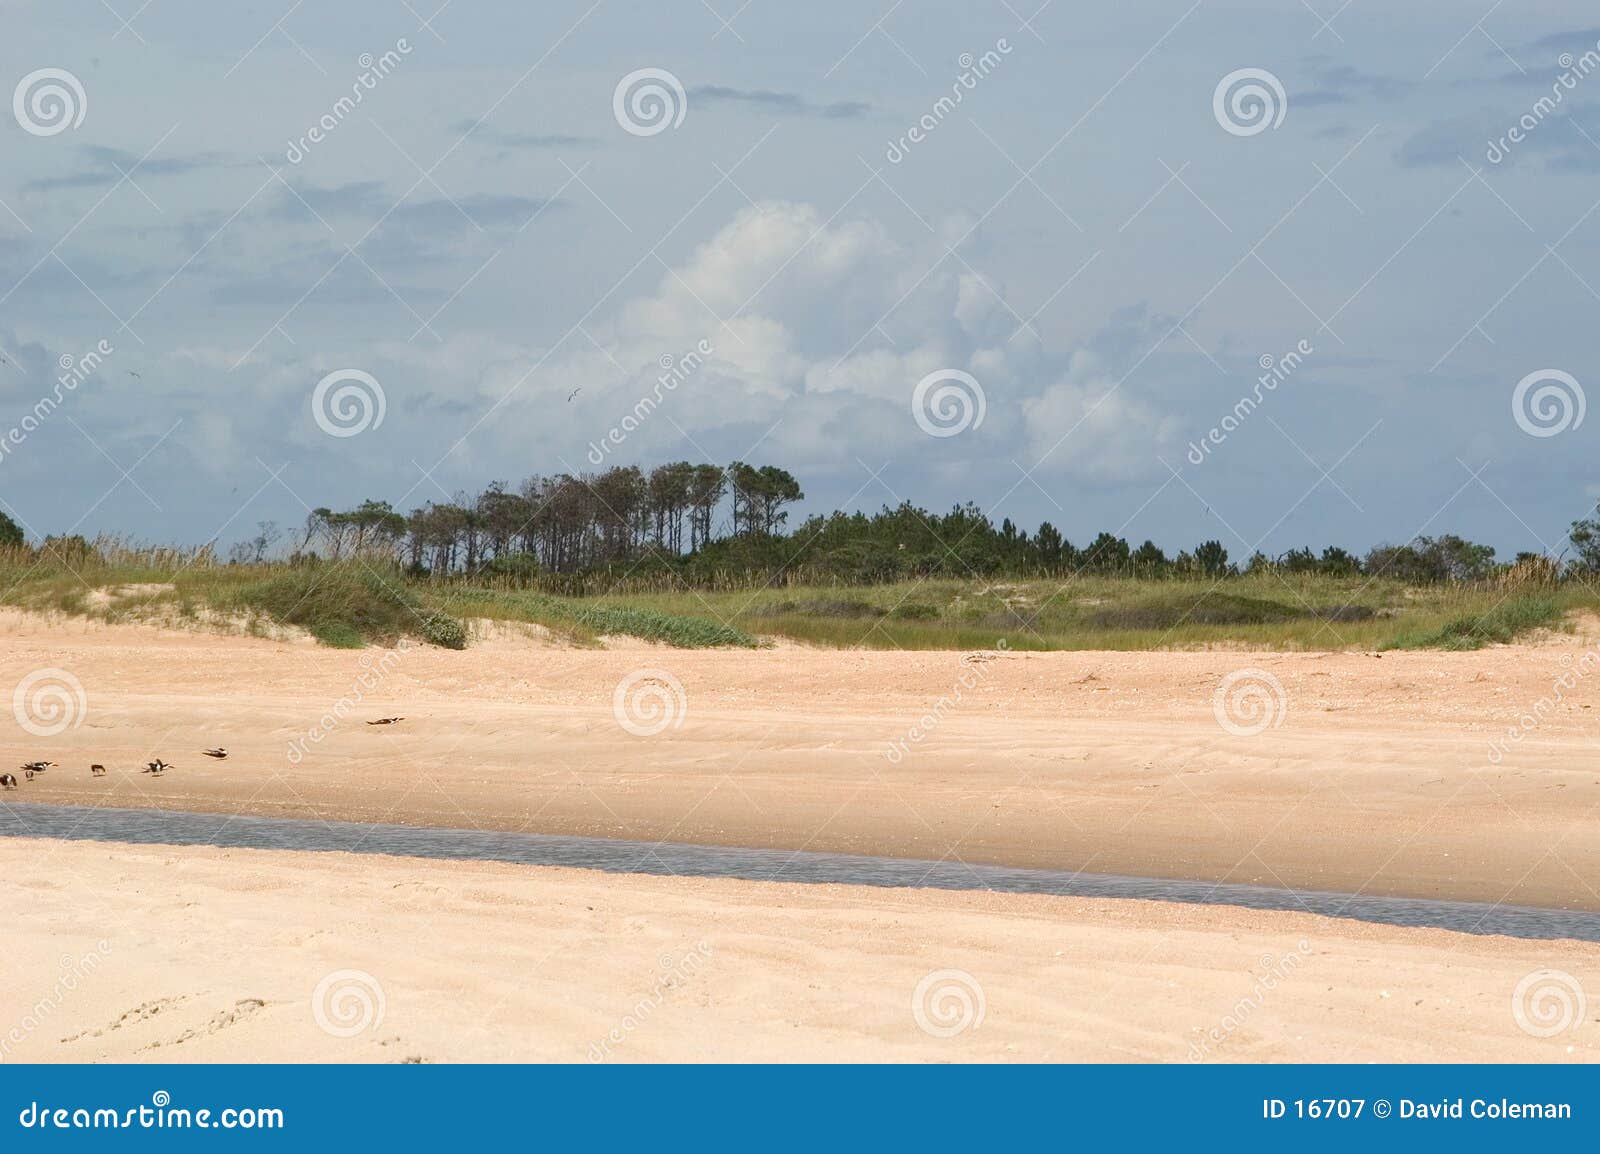 beach with trees and tidal stream